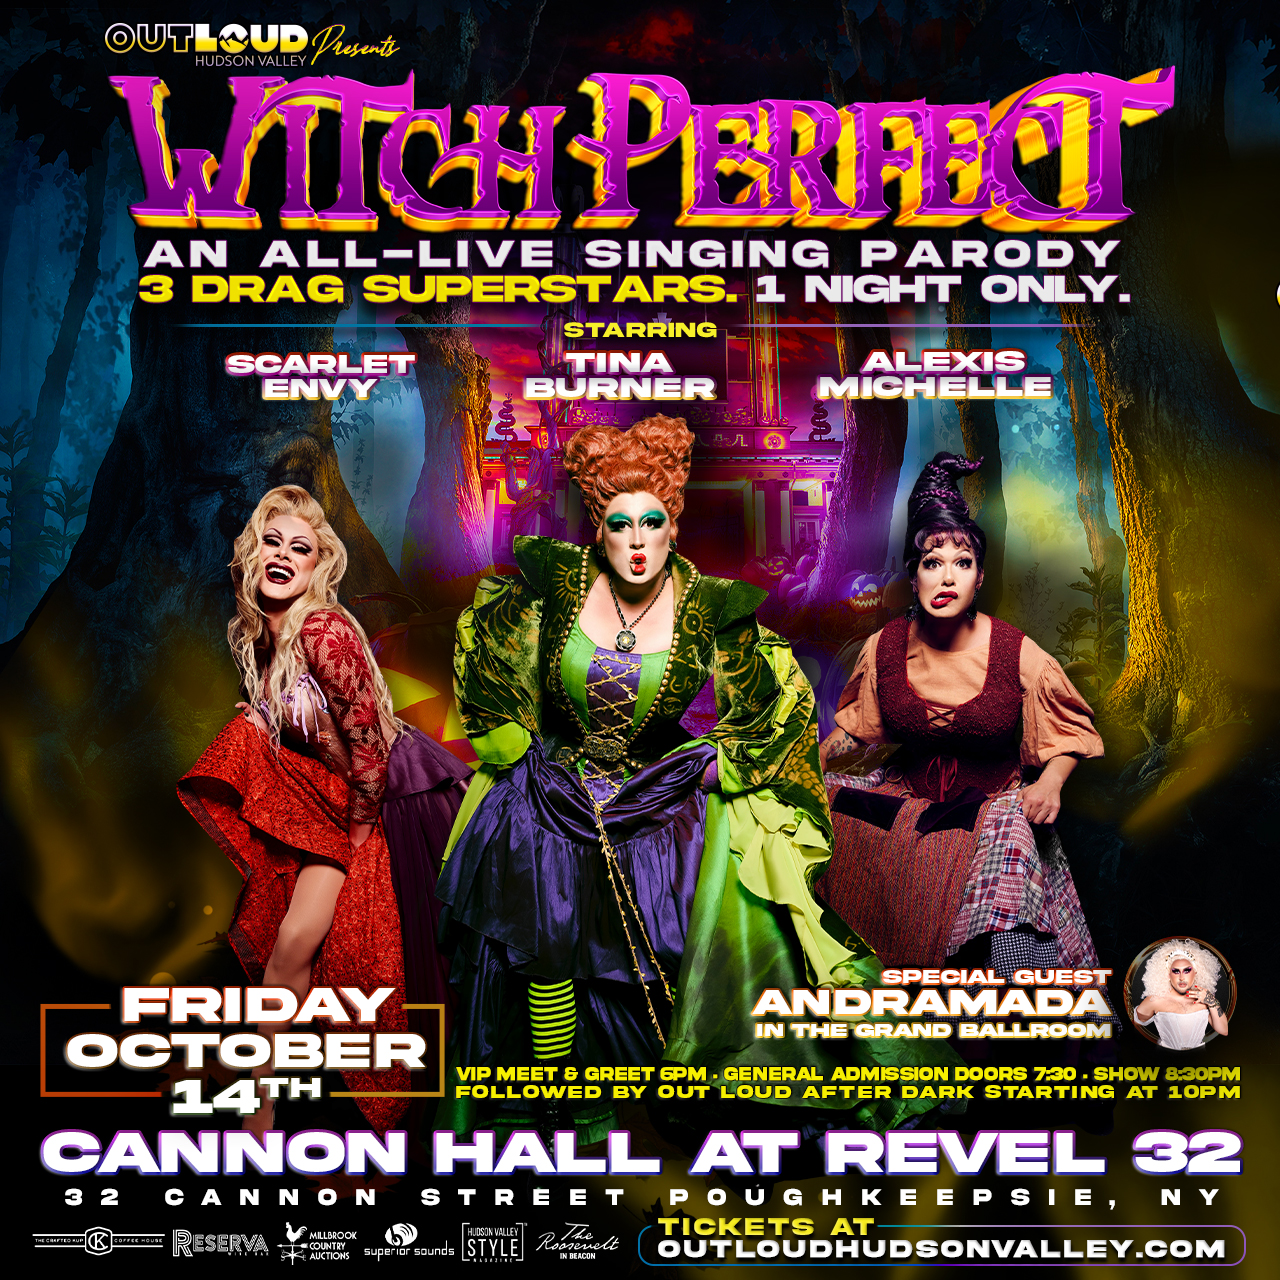 Tina Burner, Alexis Michelle and Scarlet Envy come together to star in Witch Perfect